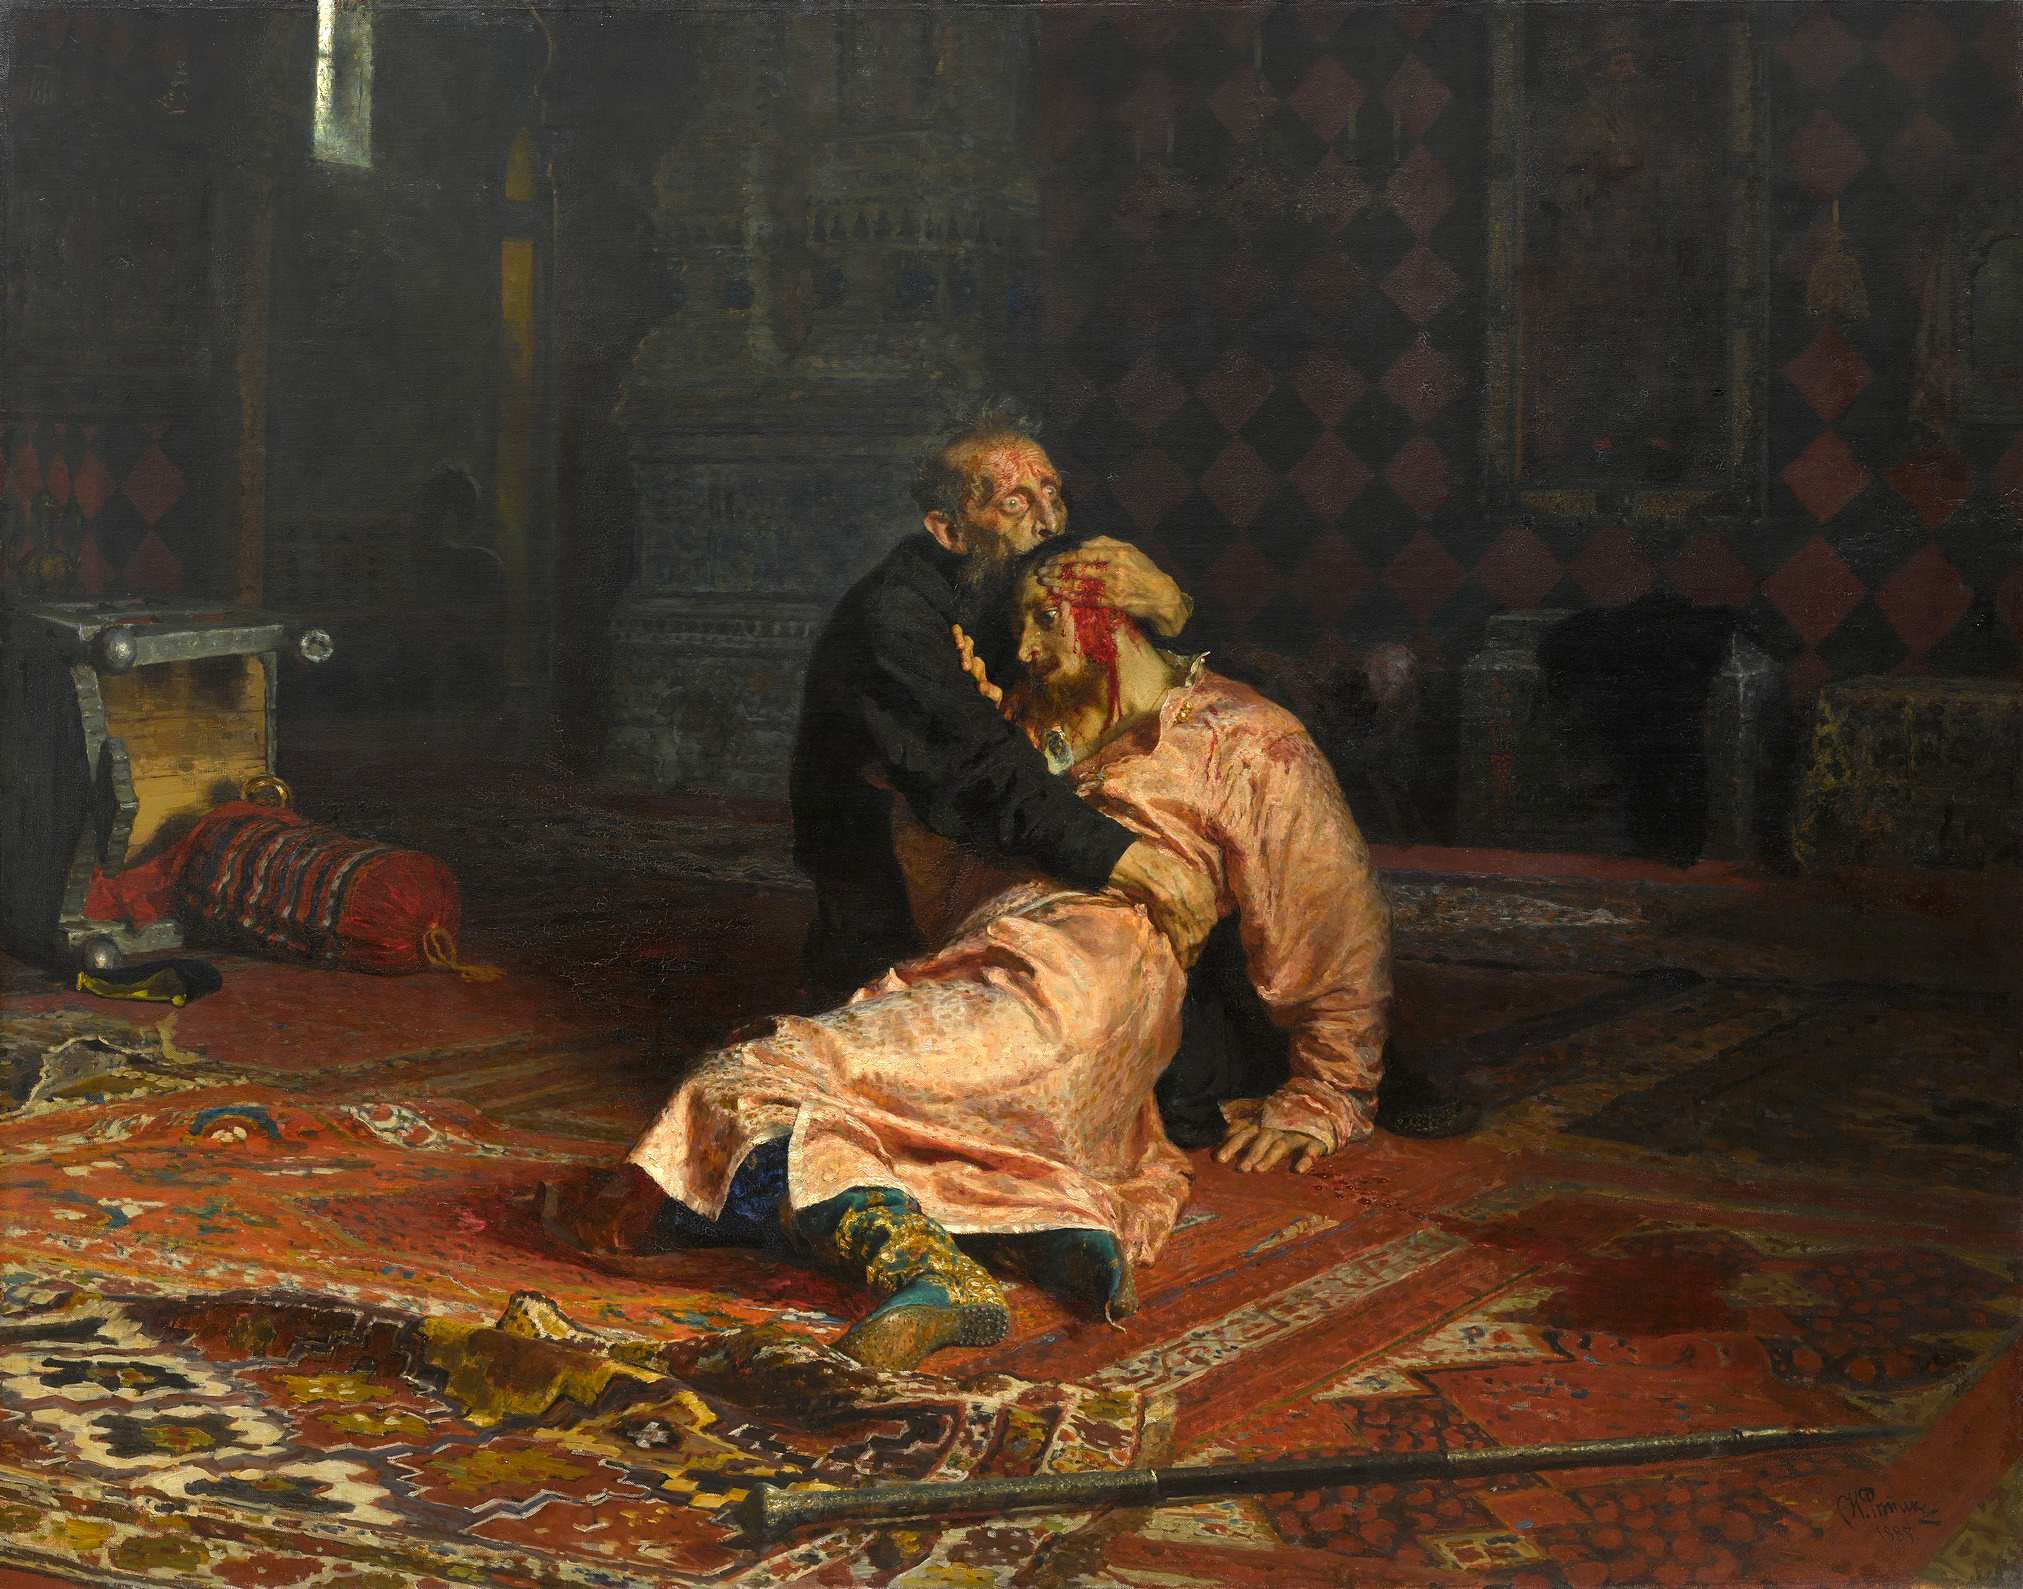 “Ivan the Terrible and his son Ivan November 16, 1581” by Repin, or a story about vandalism - My, Painting, Painting, Art, Ilya Repin, Ivan groznyj, Oil painting, Artist, Vandalism, Art history, Tretyakov Gallery, Longpost